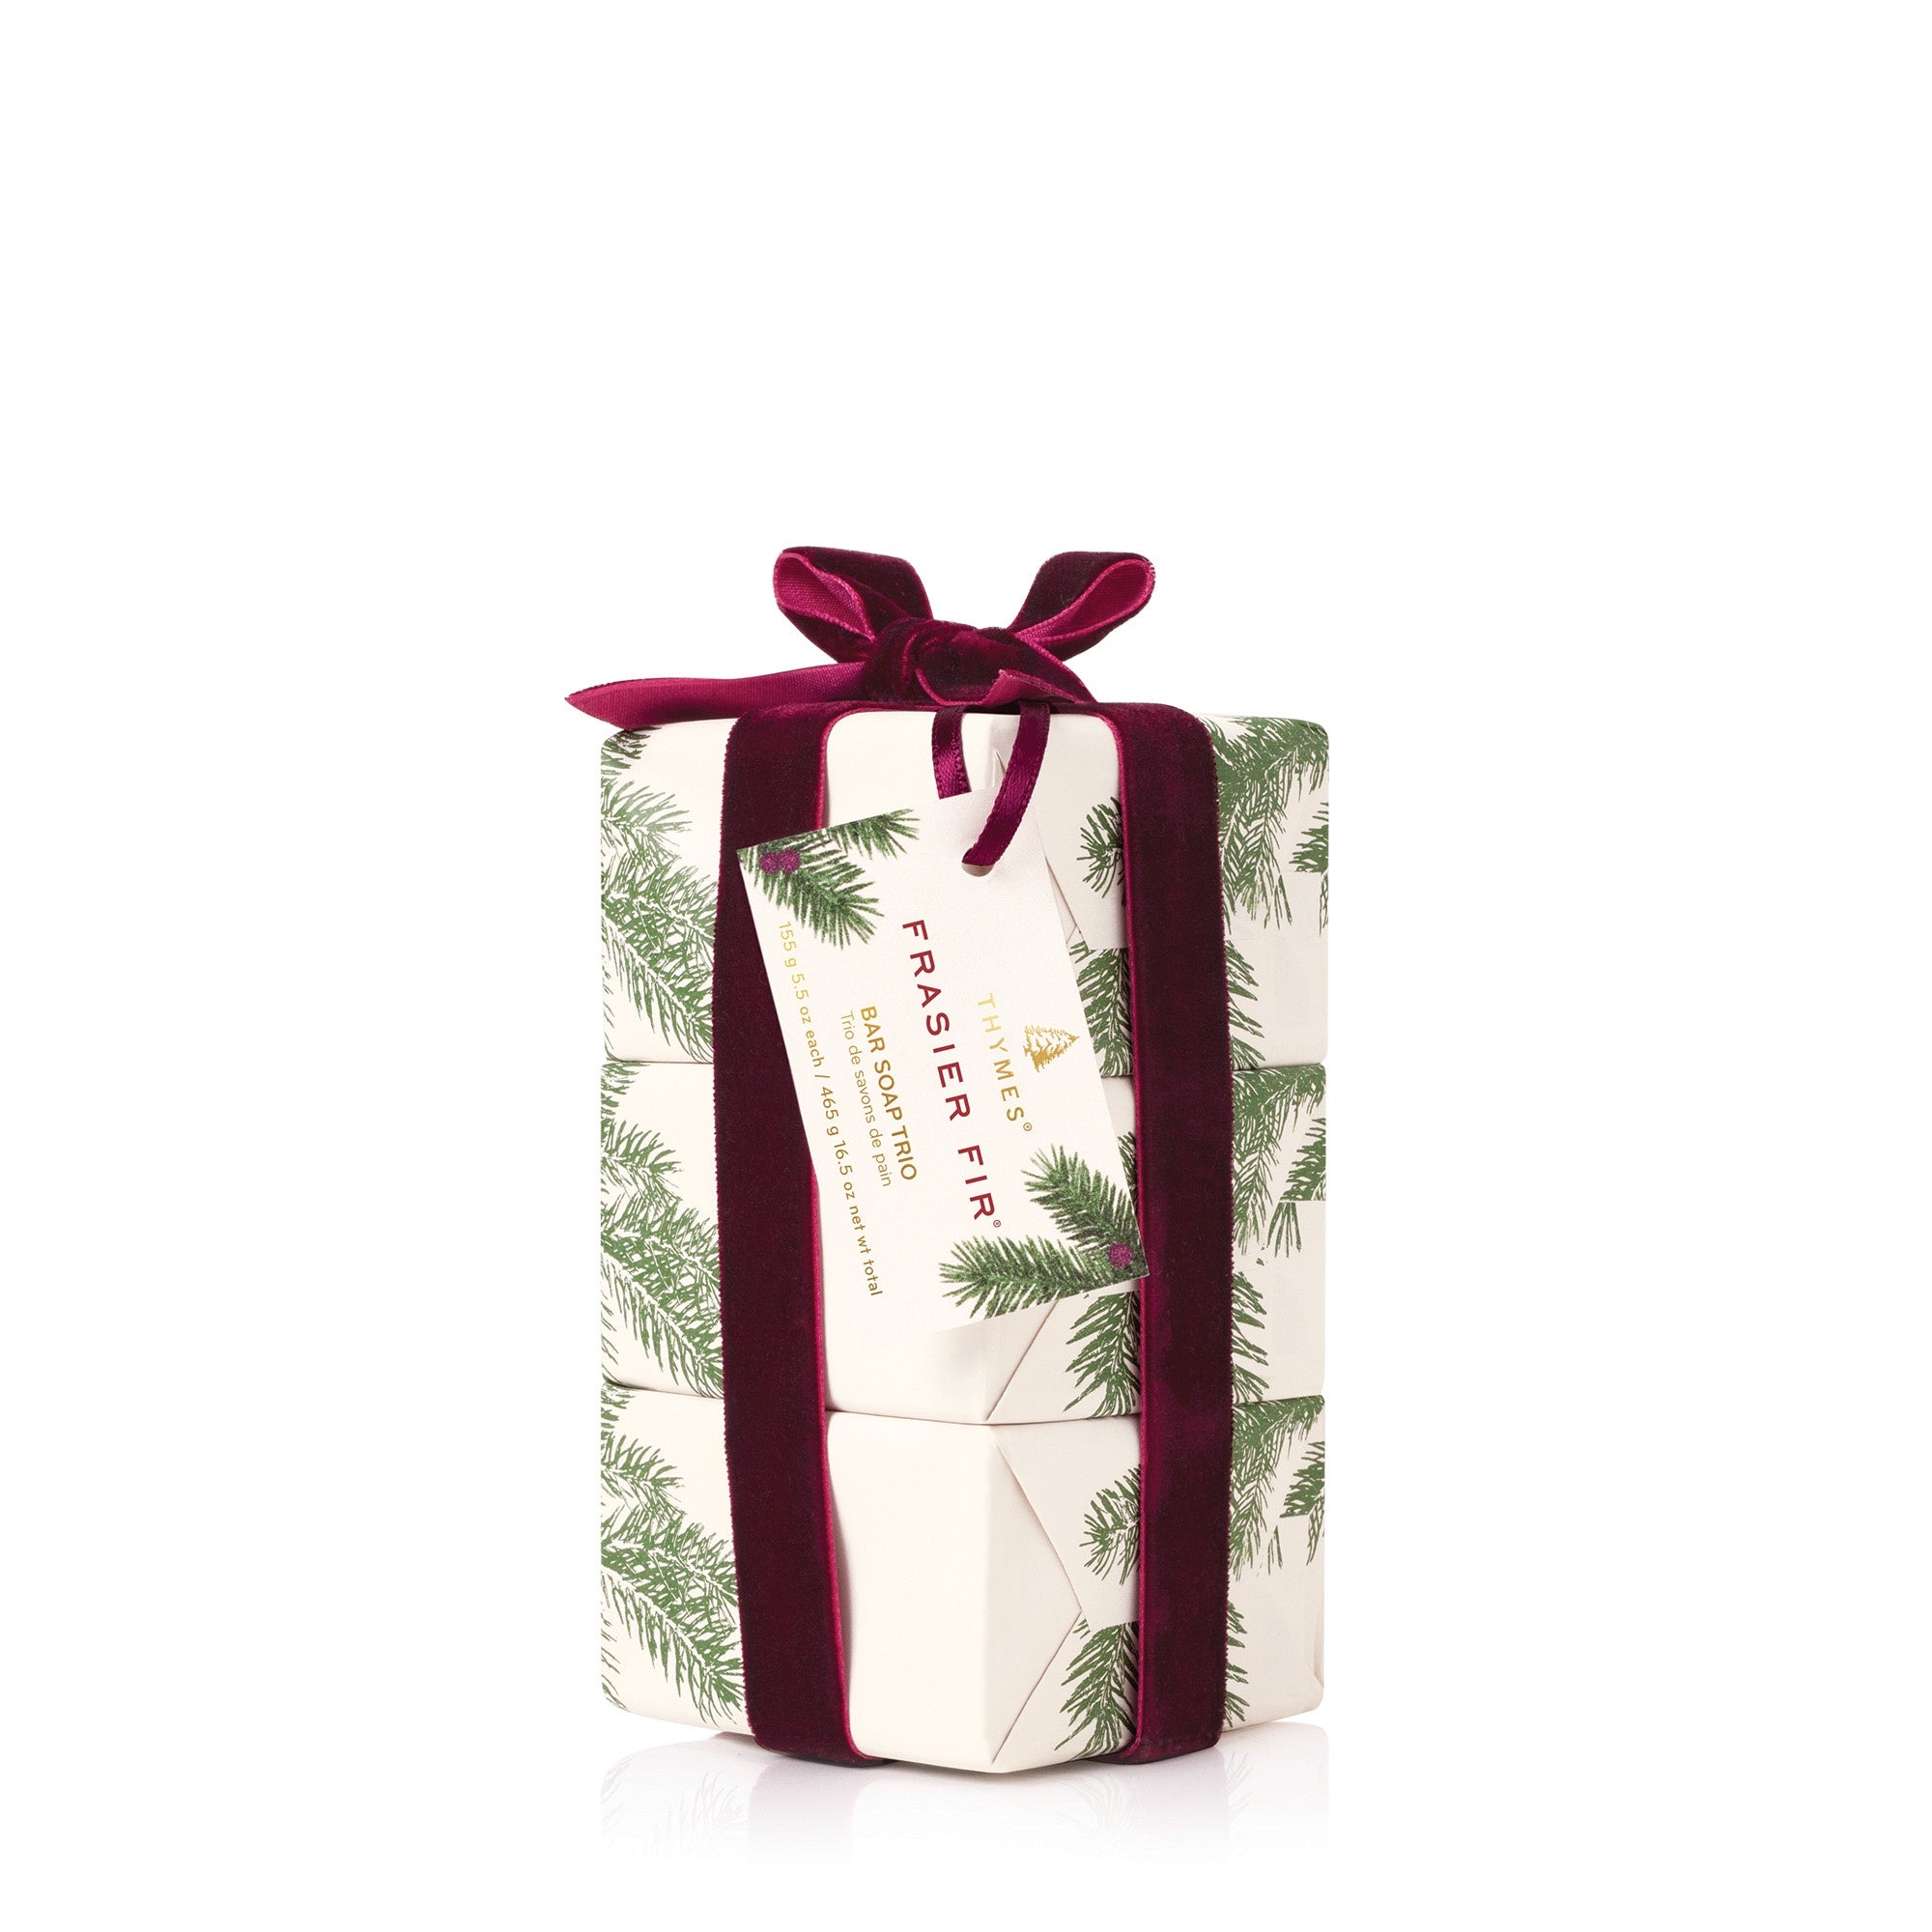 Thymes Frasier Fir Novelty Tree & Room Spray | James Anthony Collection